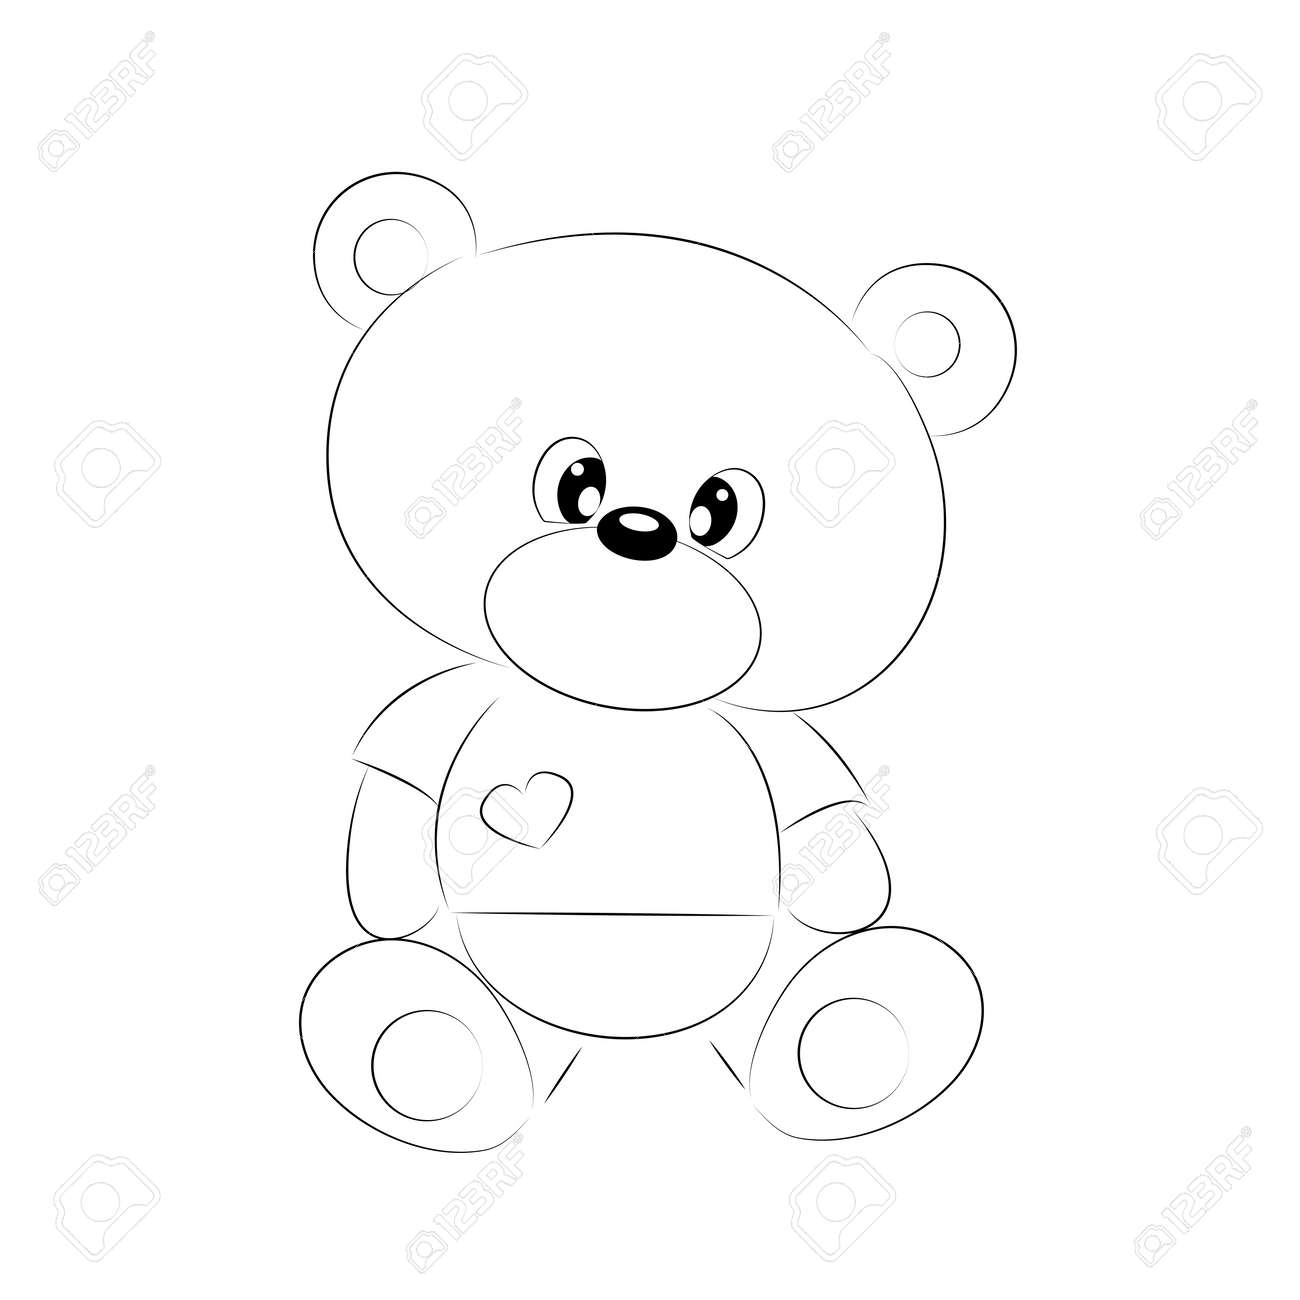 Black and white coloring book for preschool children cute teddy bear beautiful outline illustration isolated on white background one line coloring book for kids and adults print on t